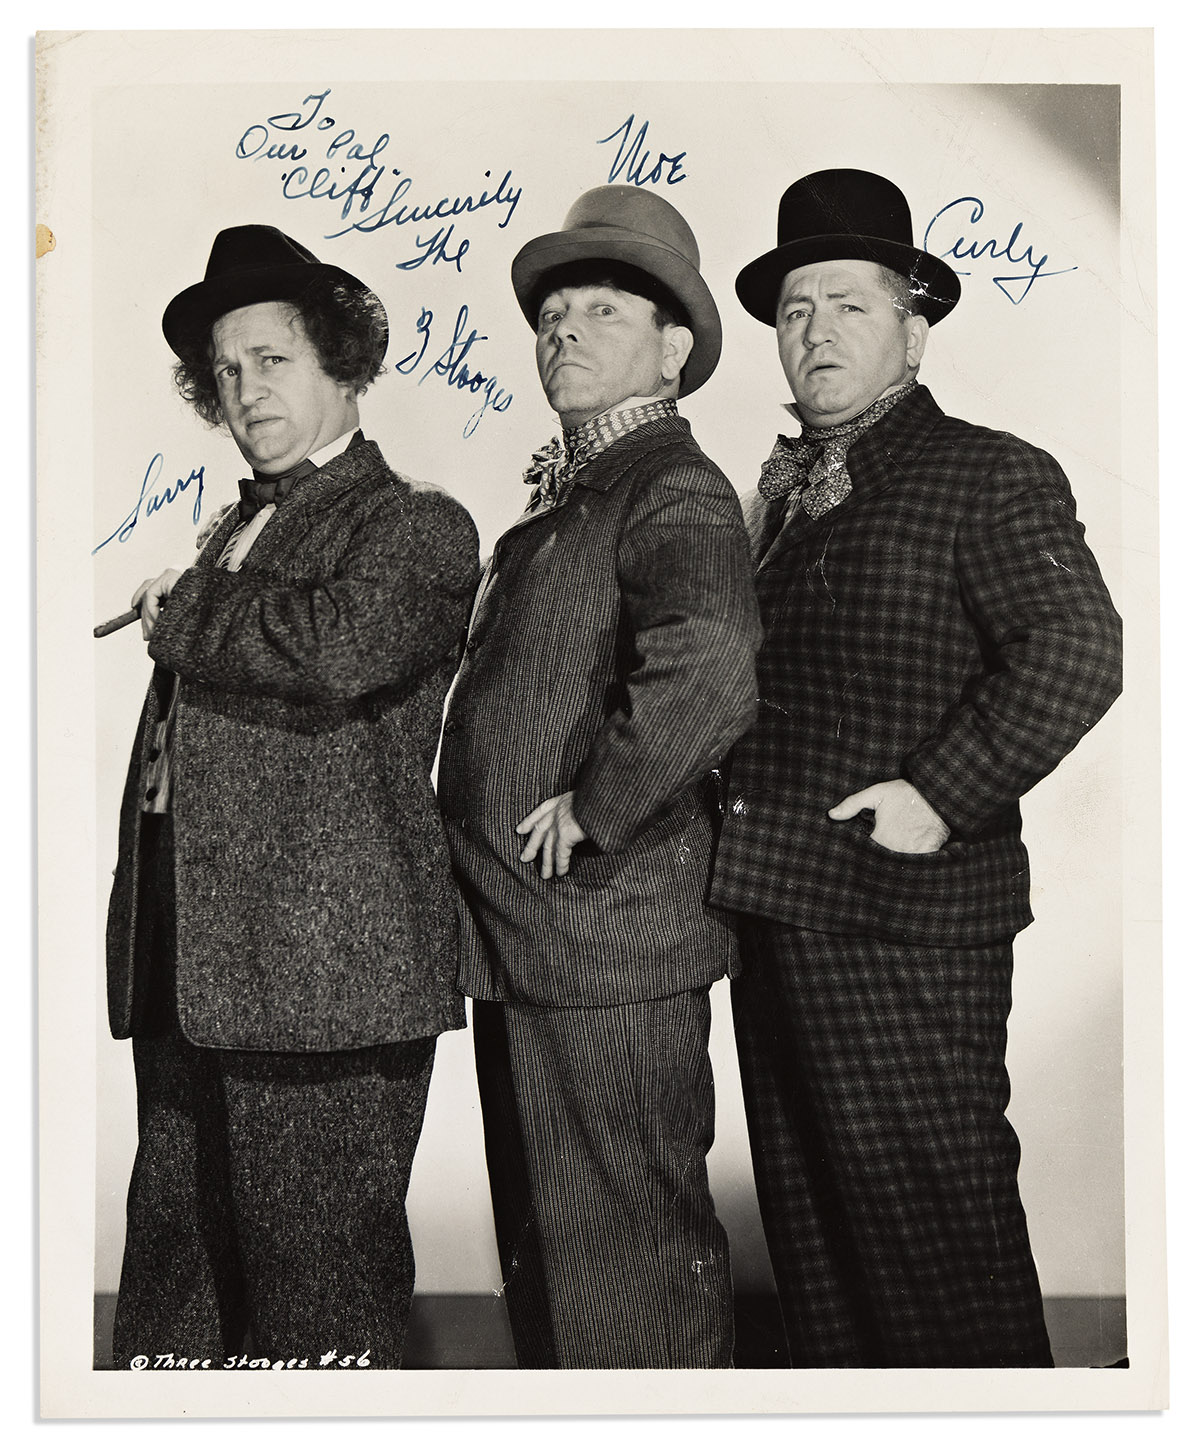 (ENTERTAINERS.) THREE STOOGES, THE. Photograph Signed by Larry Fine, Moe Howard, and Curly Howard (Larry, Moe, Curly),